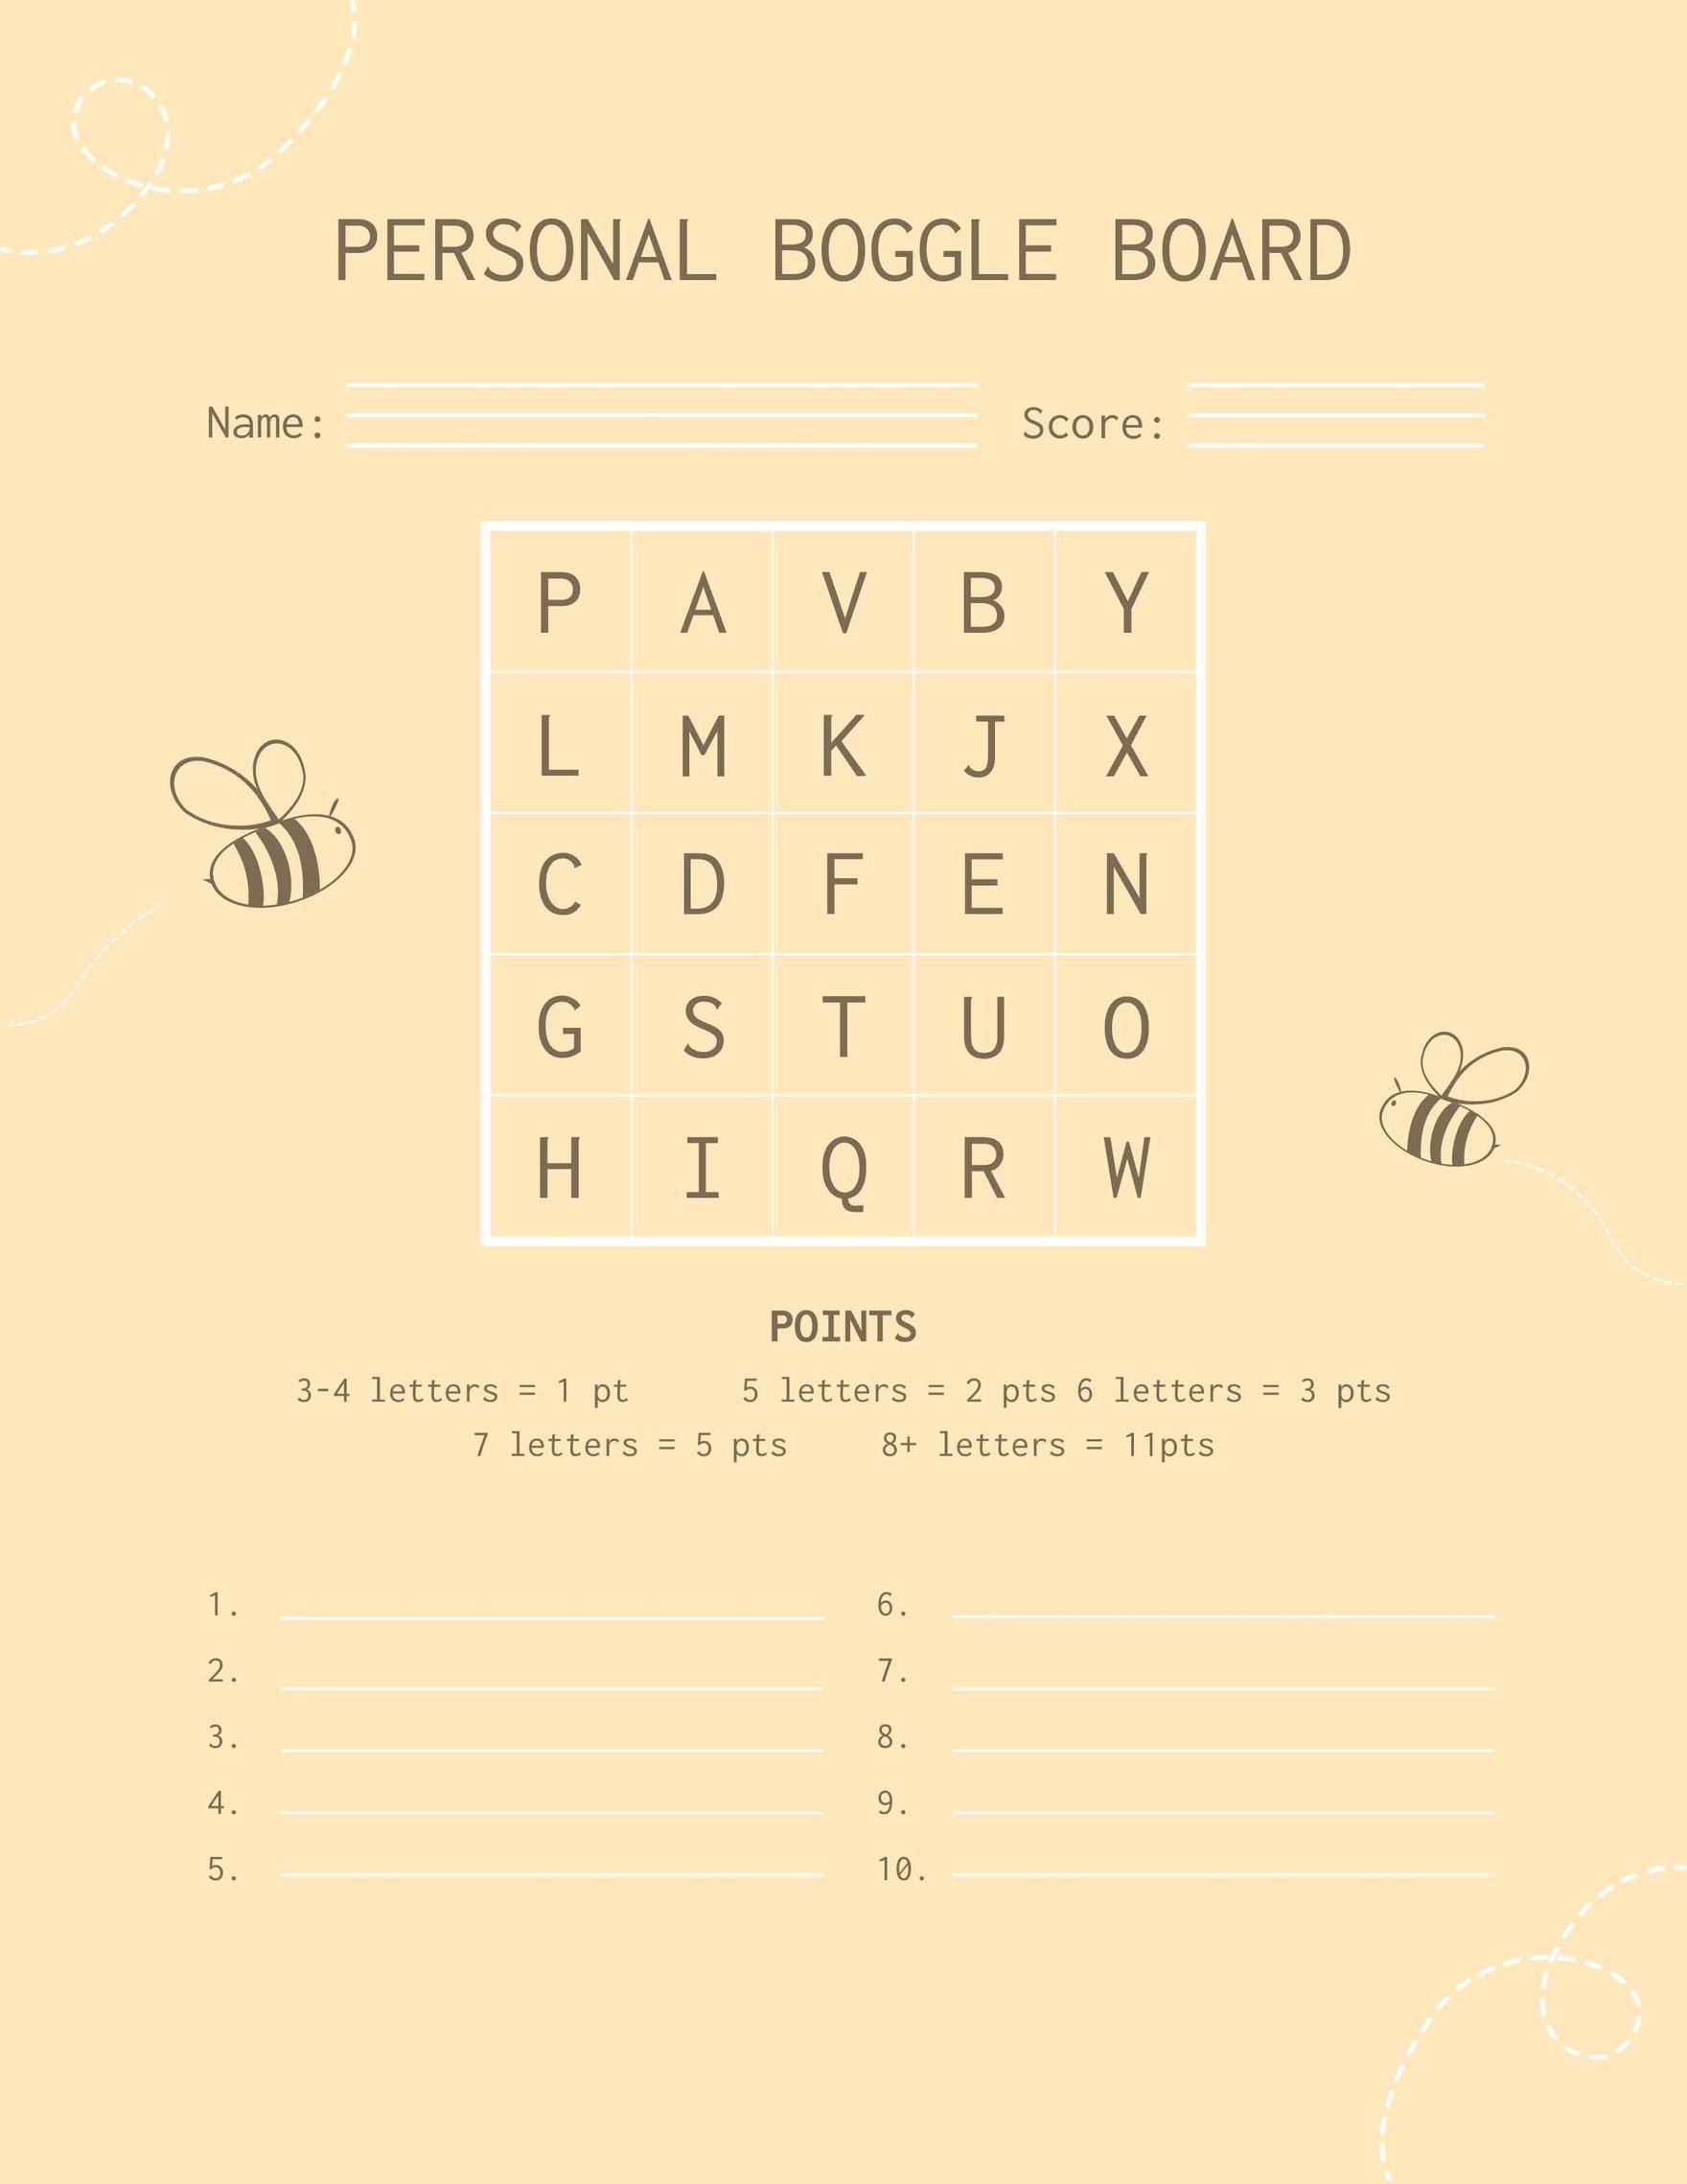 boggle-board-template-in-word-free-download